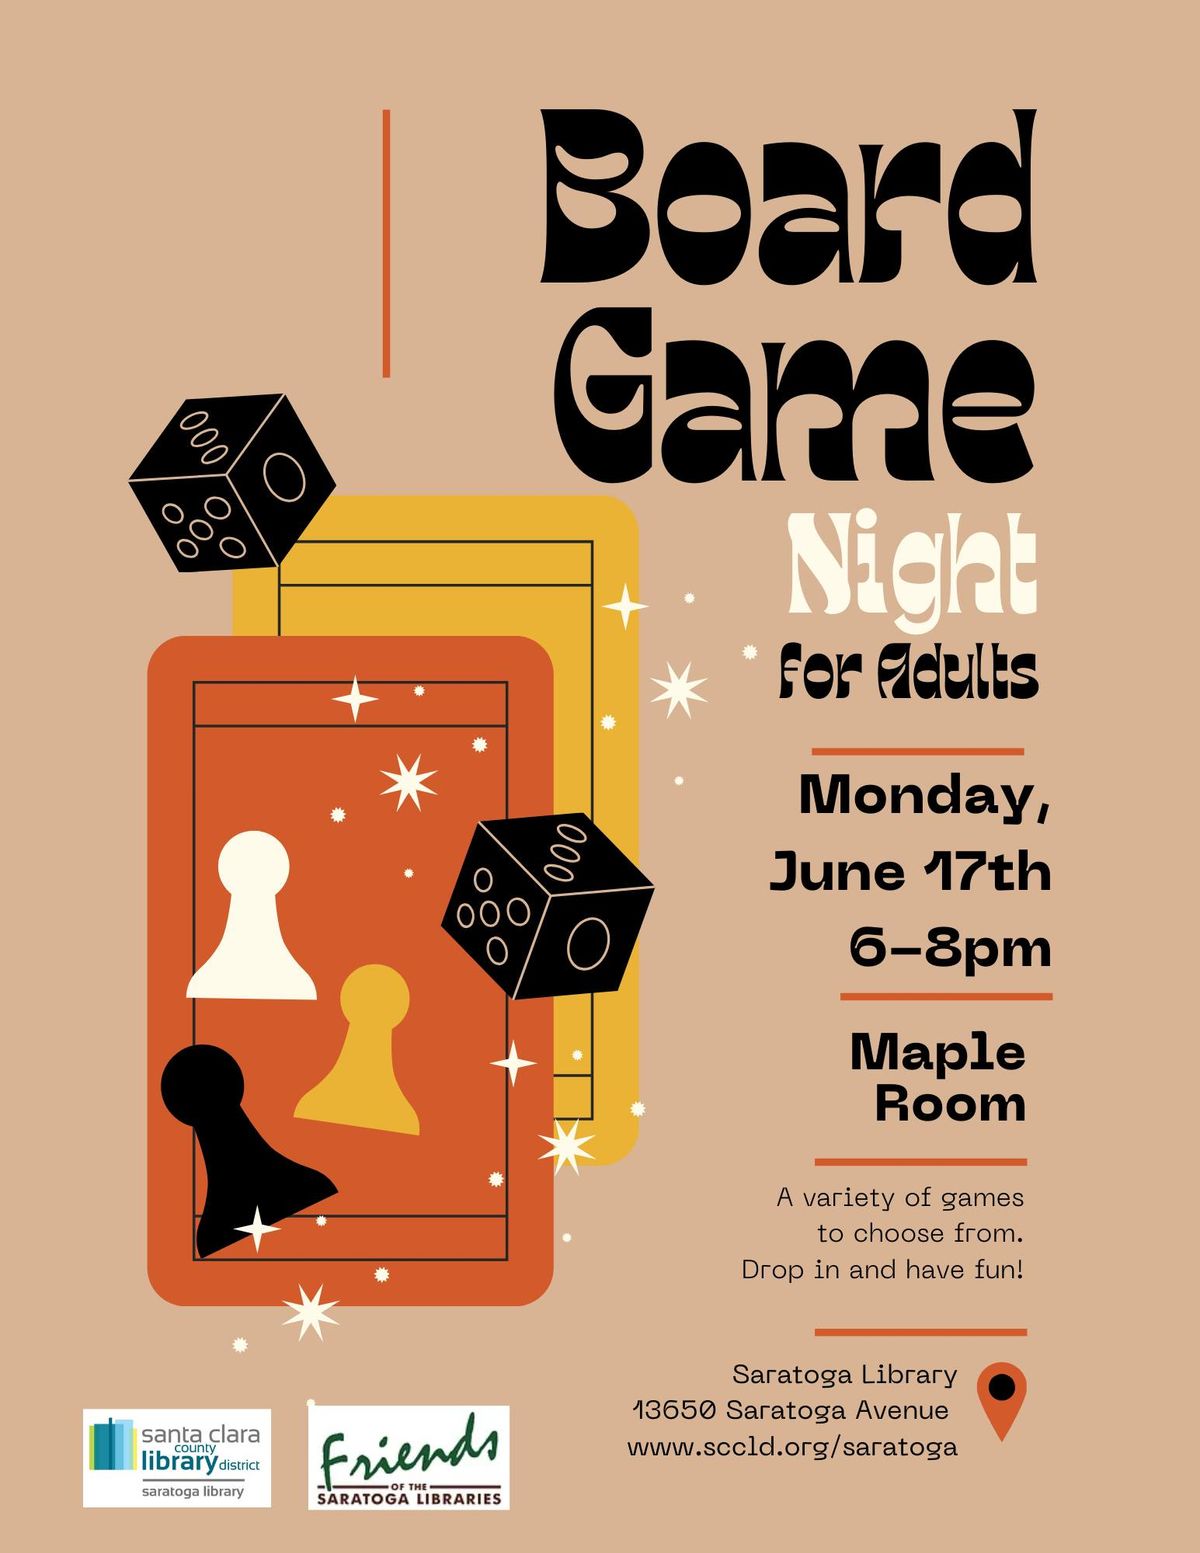 Board Game Night at the Saratoga Library